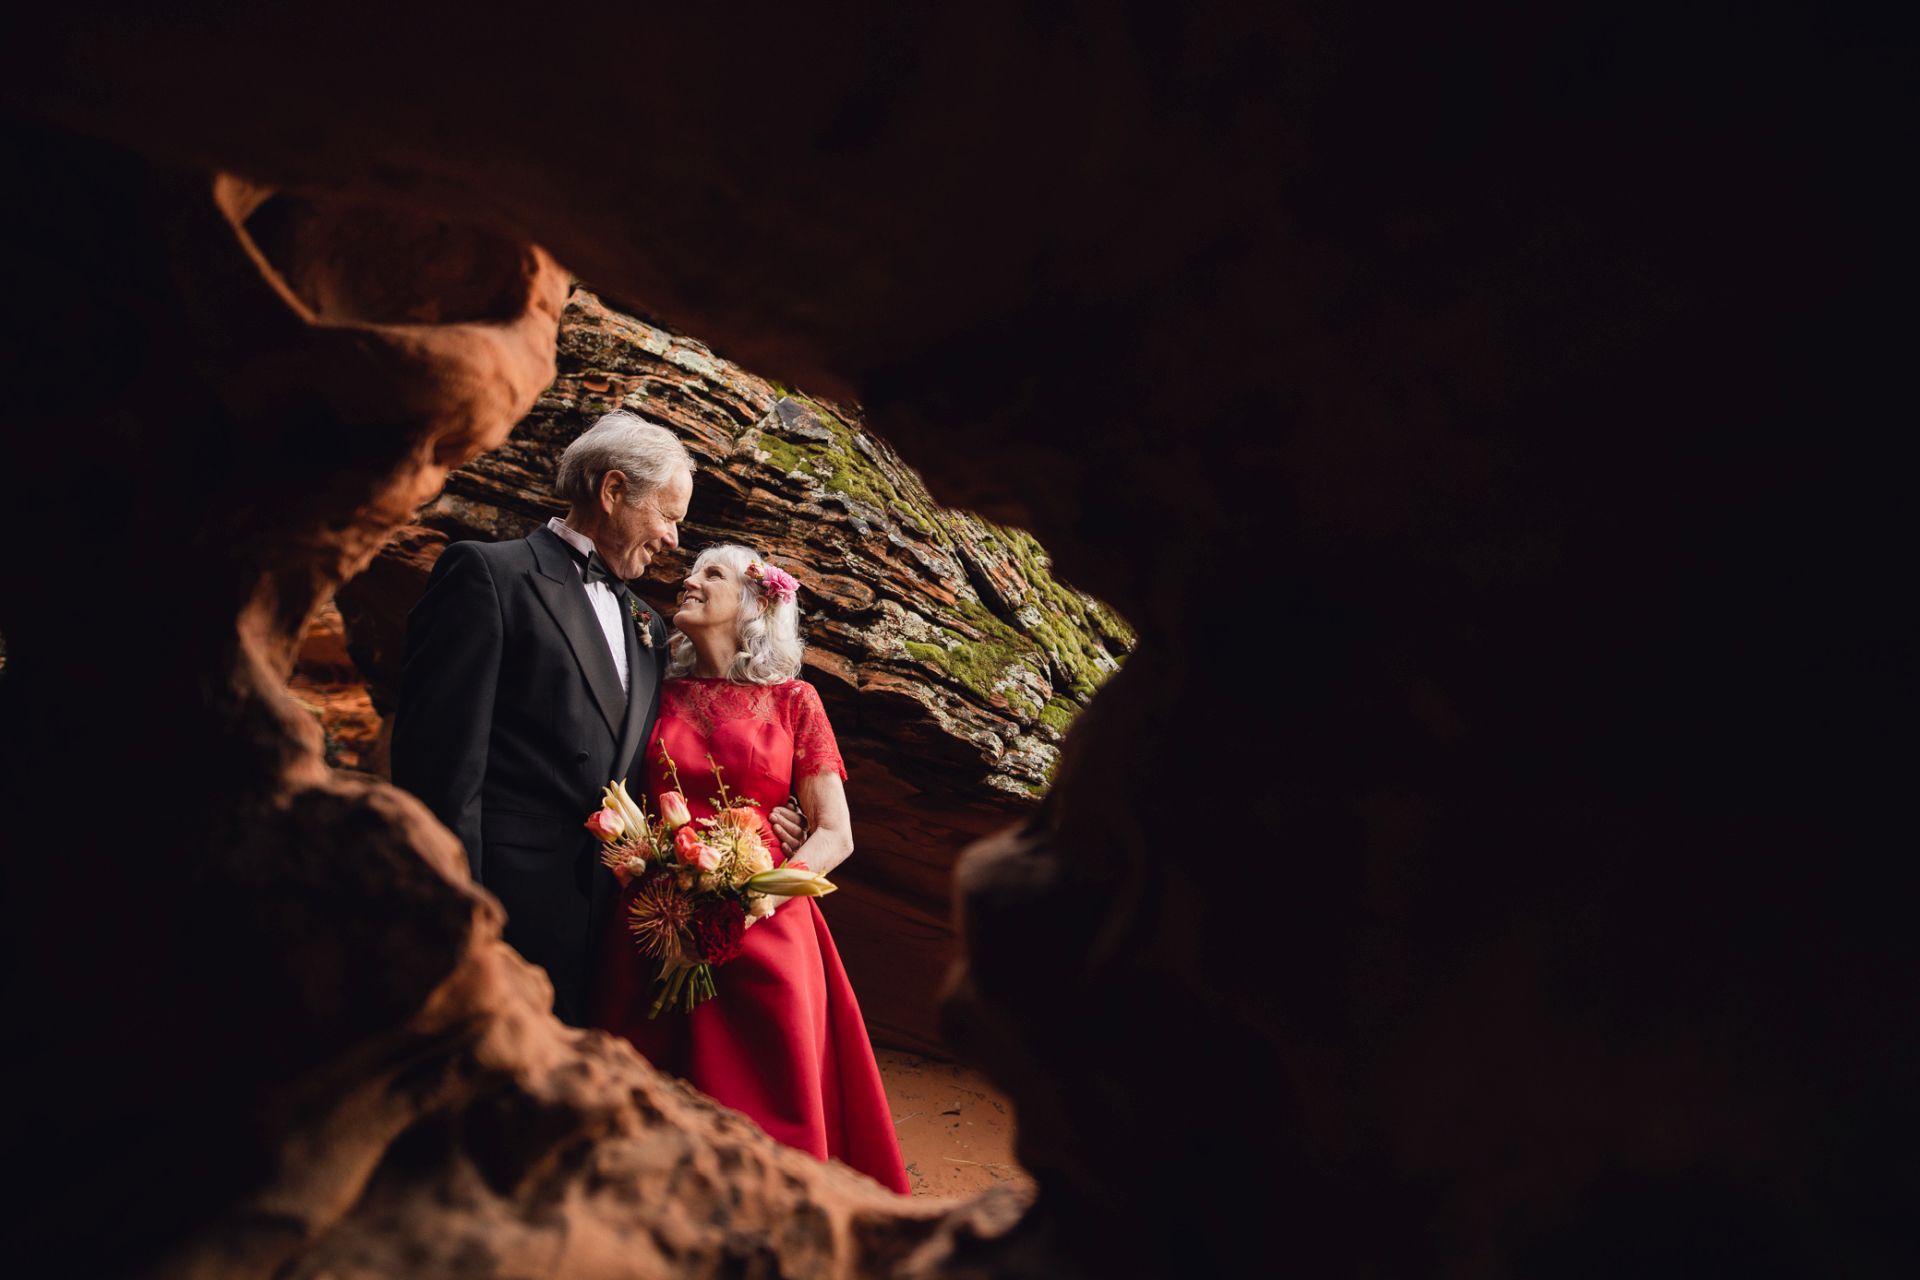 adventure wedding in the utah desert - couple photographed in spectacular cave